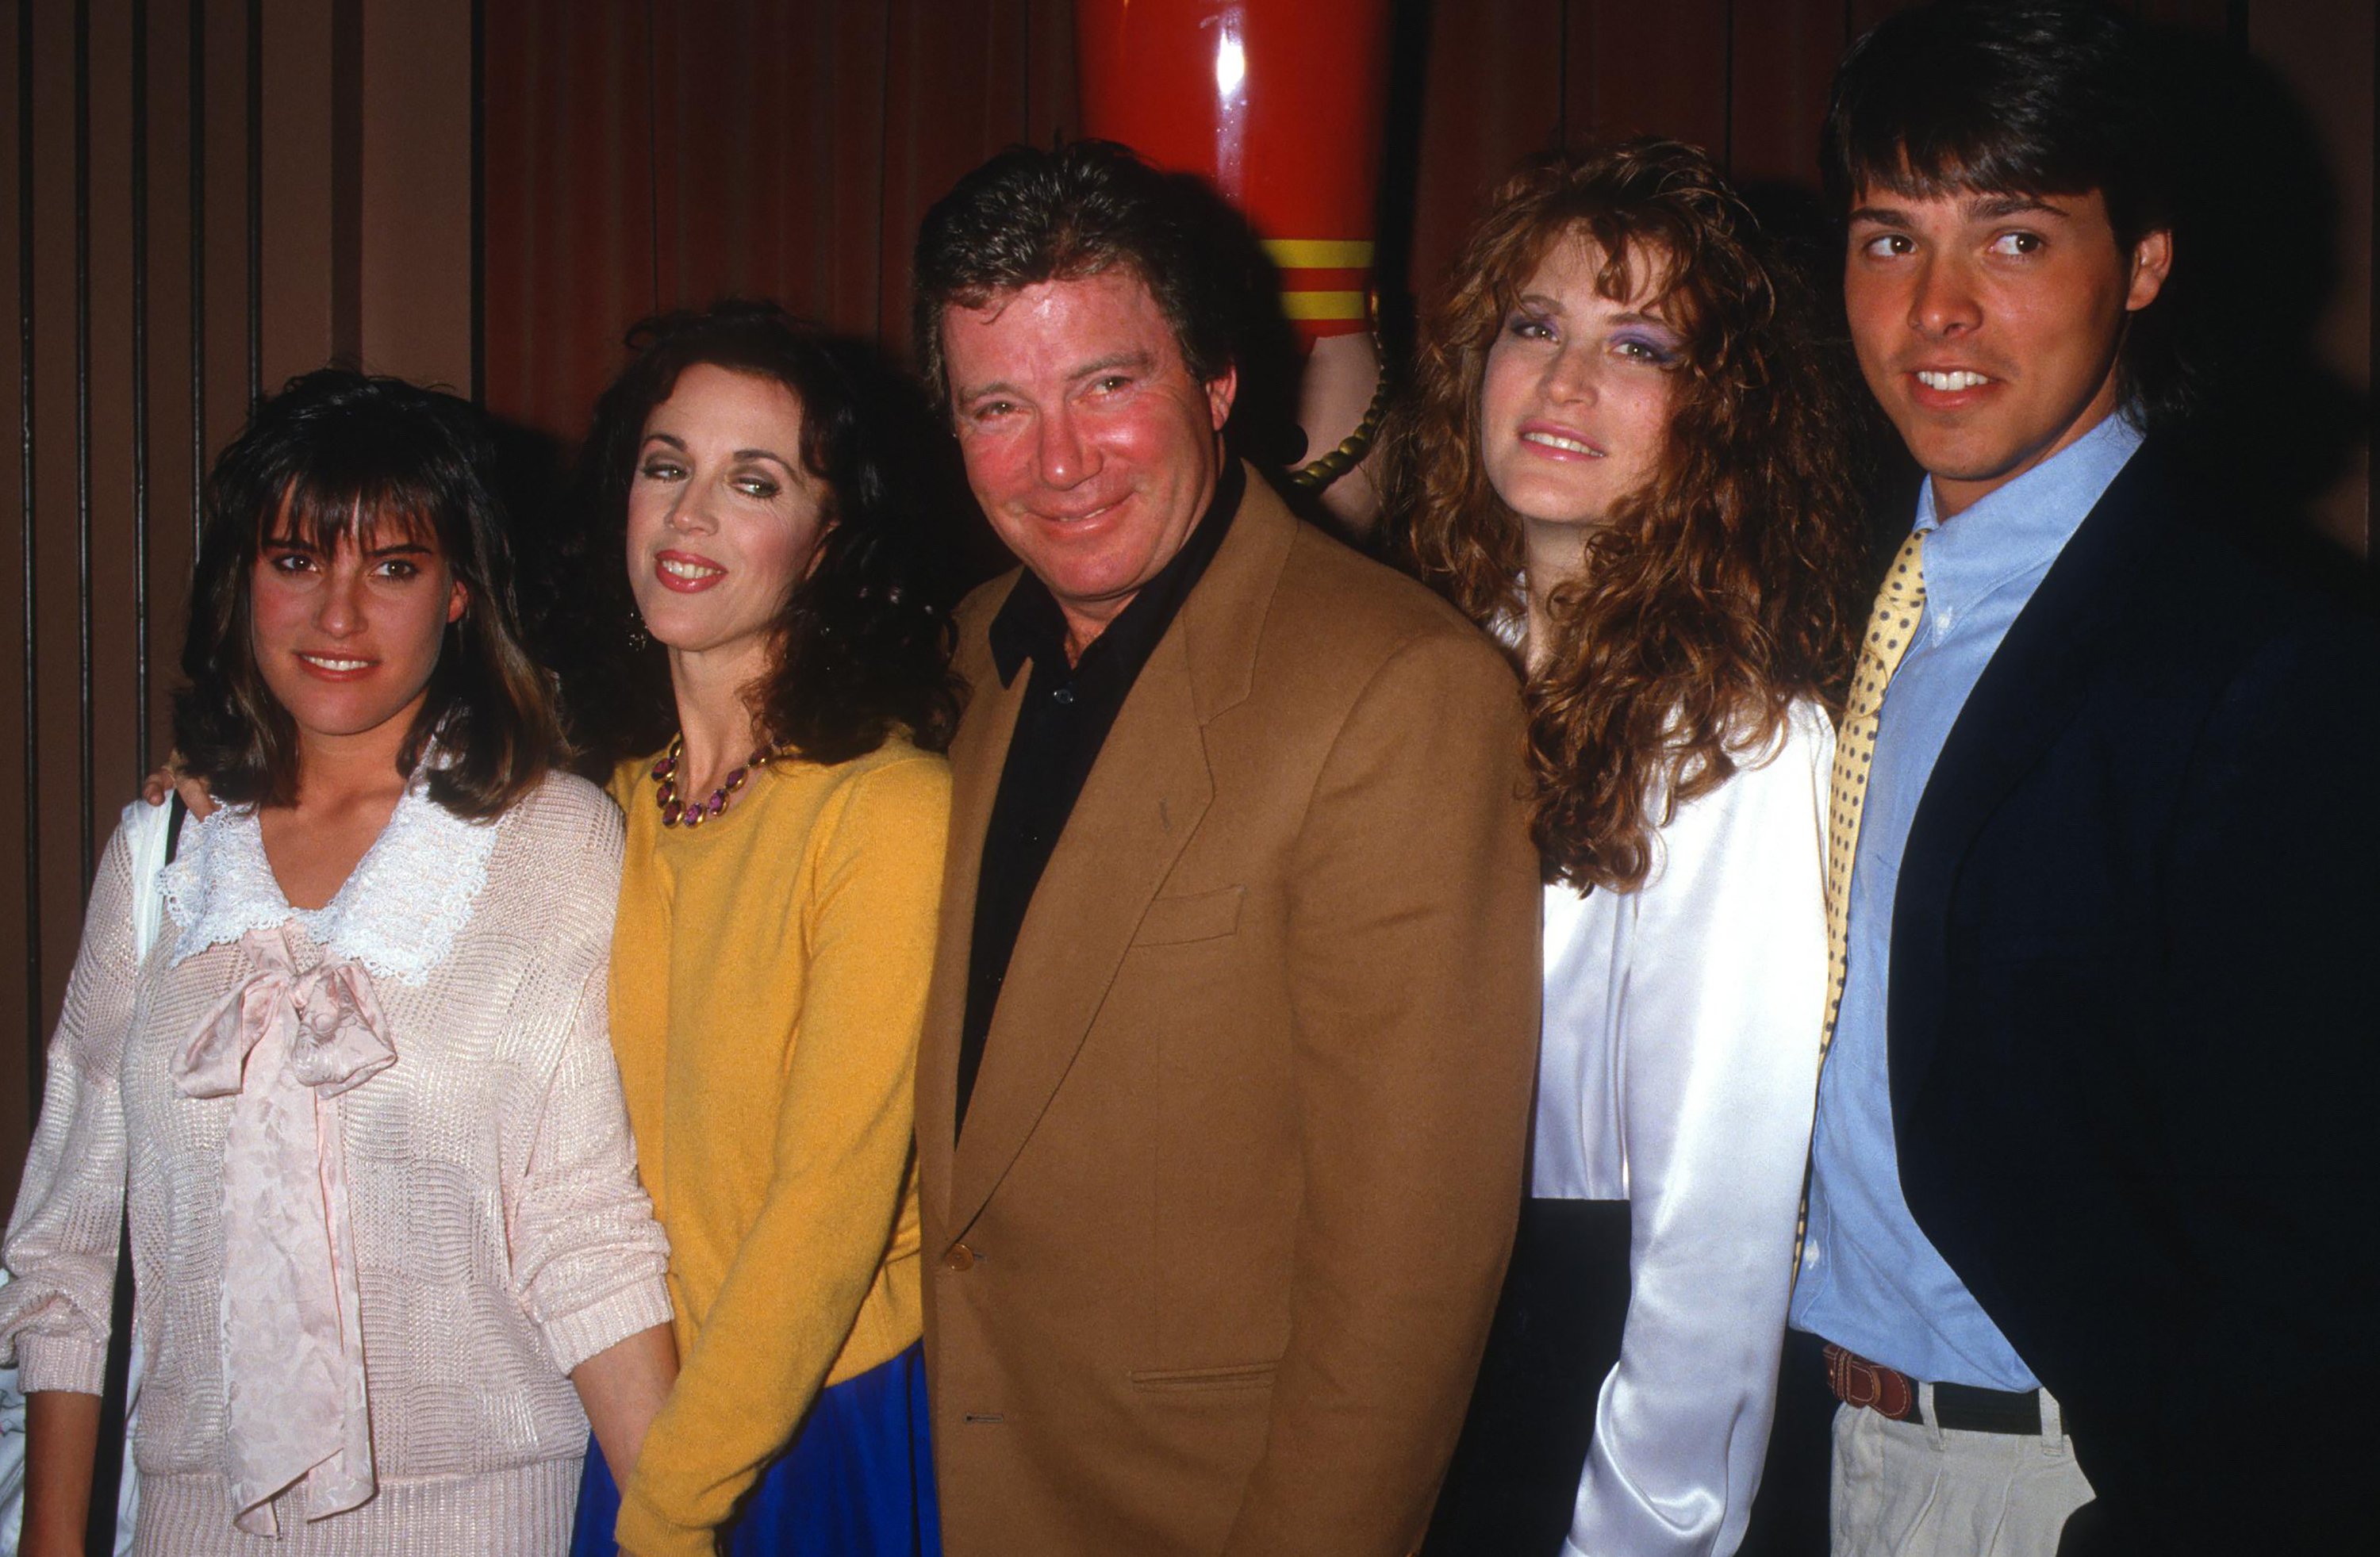 Marcy Lafferty and William Shatner with two of his daughters and a guest at the Mother-Daughter Celebrity Fashion Show in Beverly Hills, California, on March 26, 1987 | Source: Getty Images